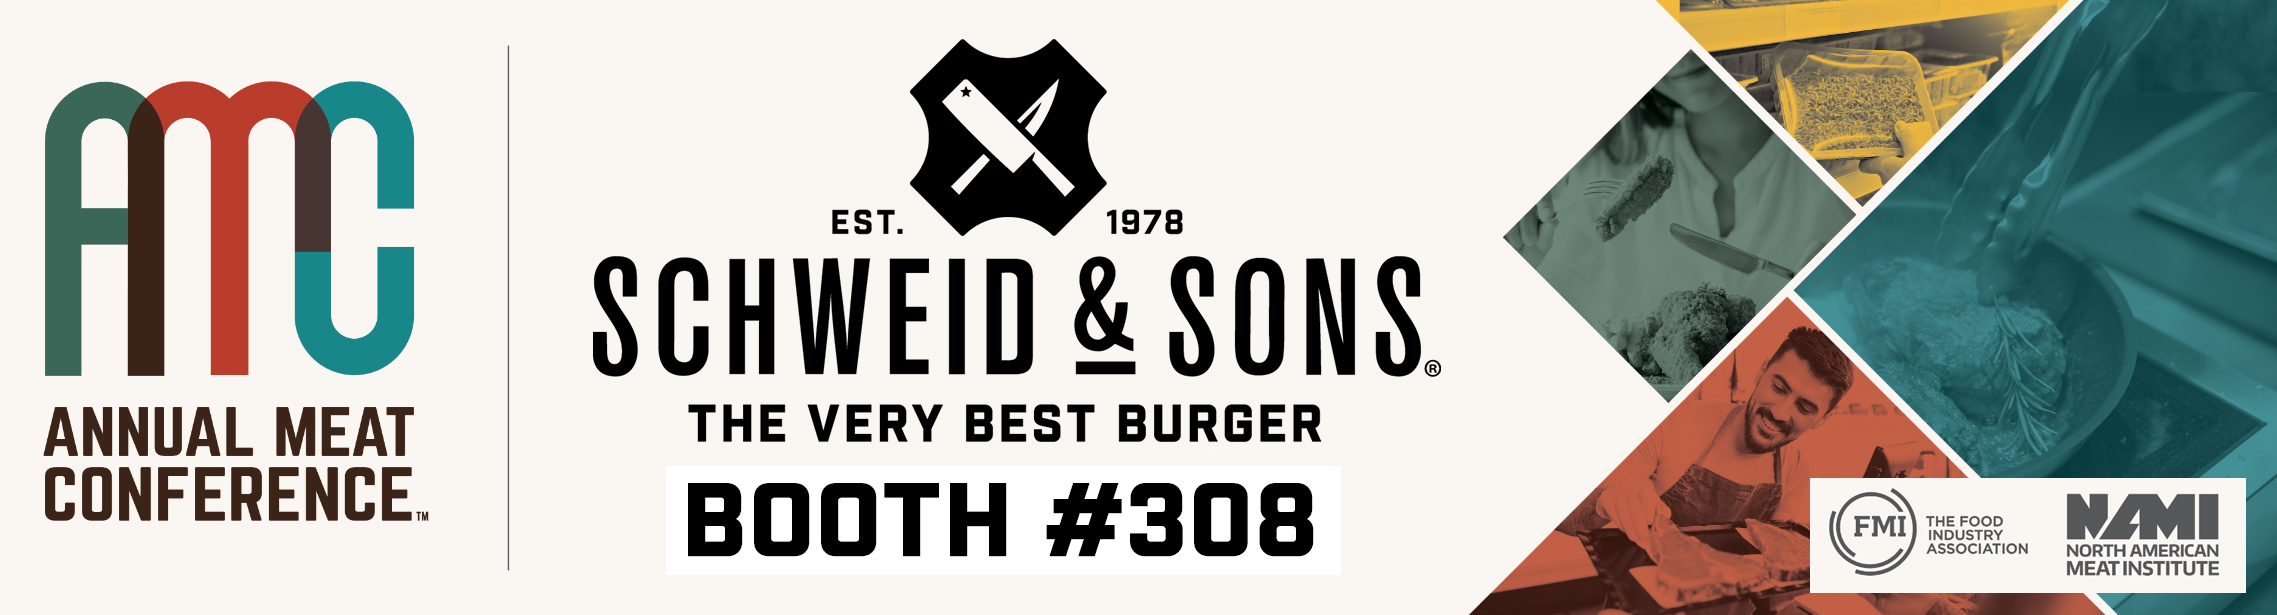 Banner for American Meat Conference with Schweid and Sons logo and booth number 308